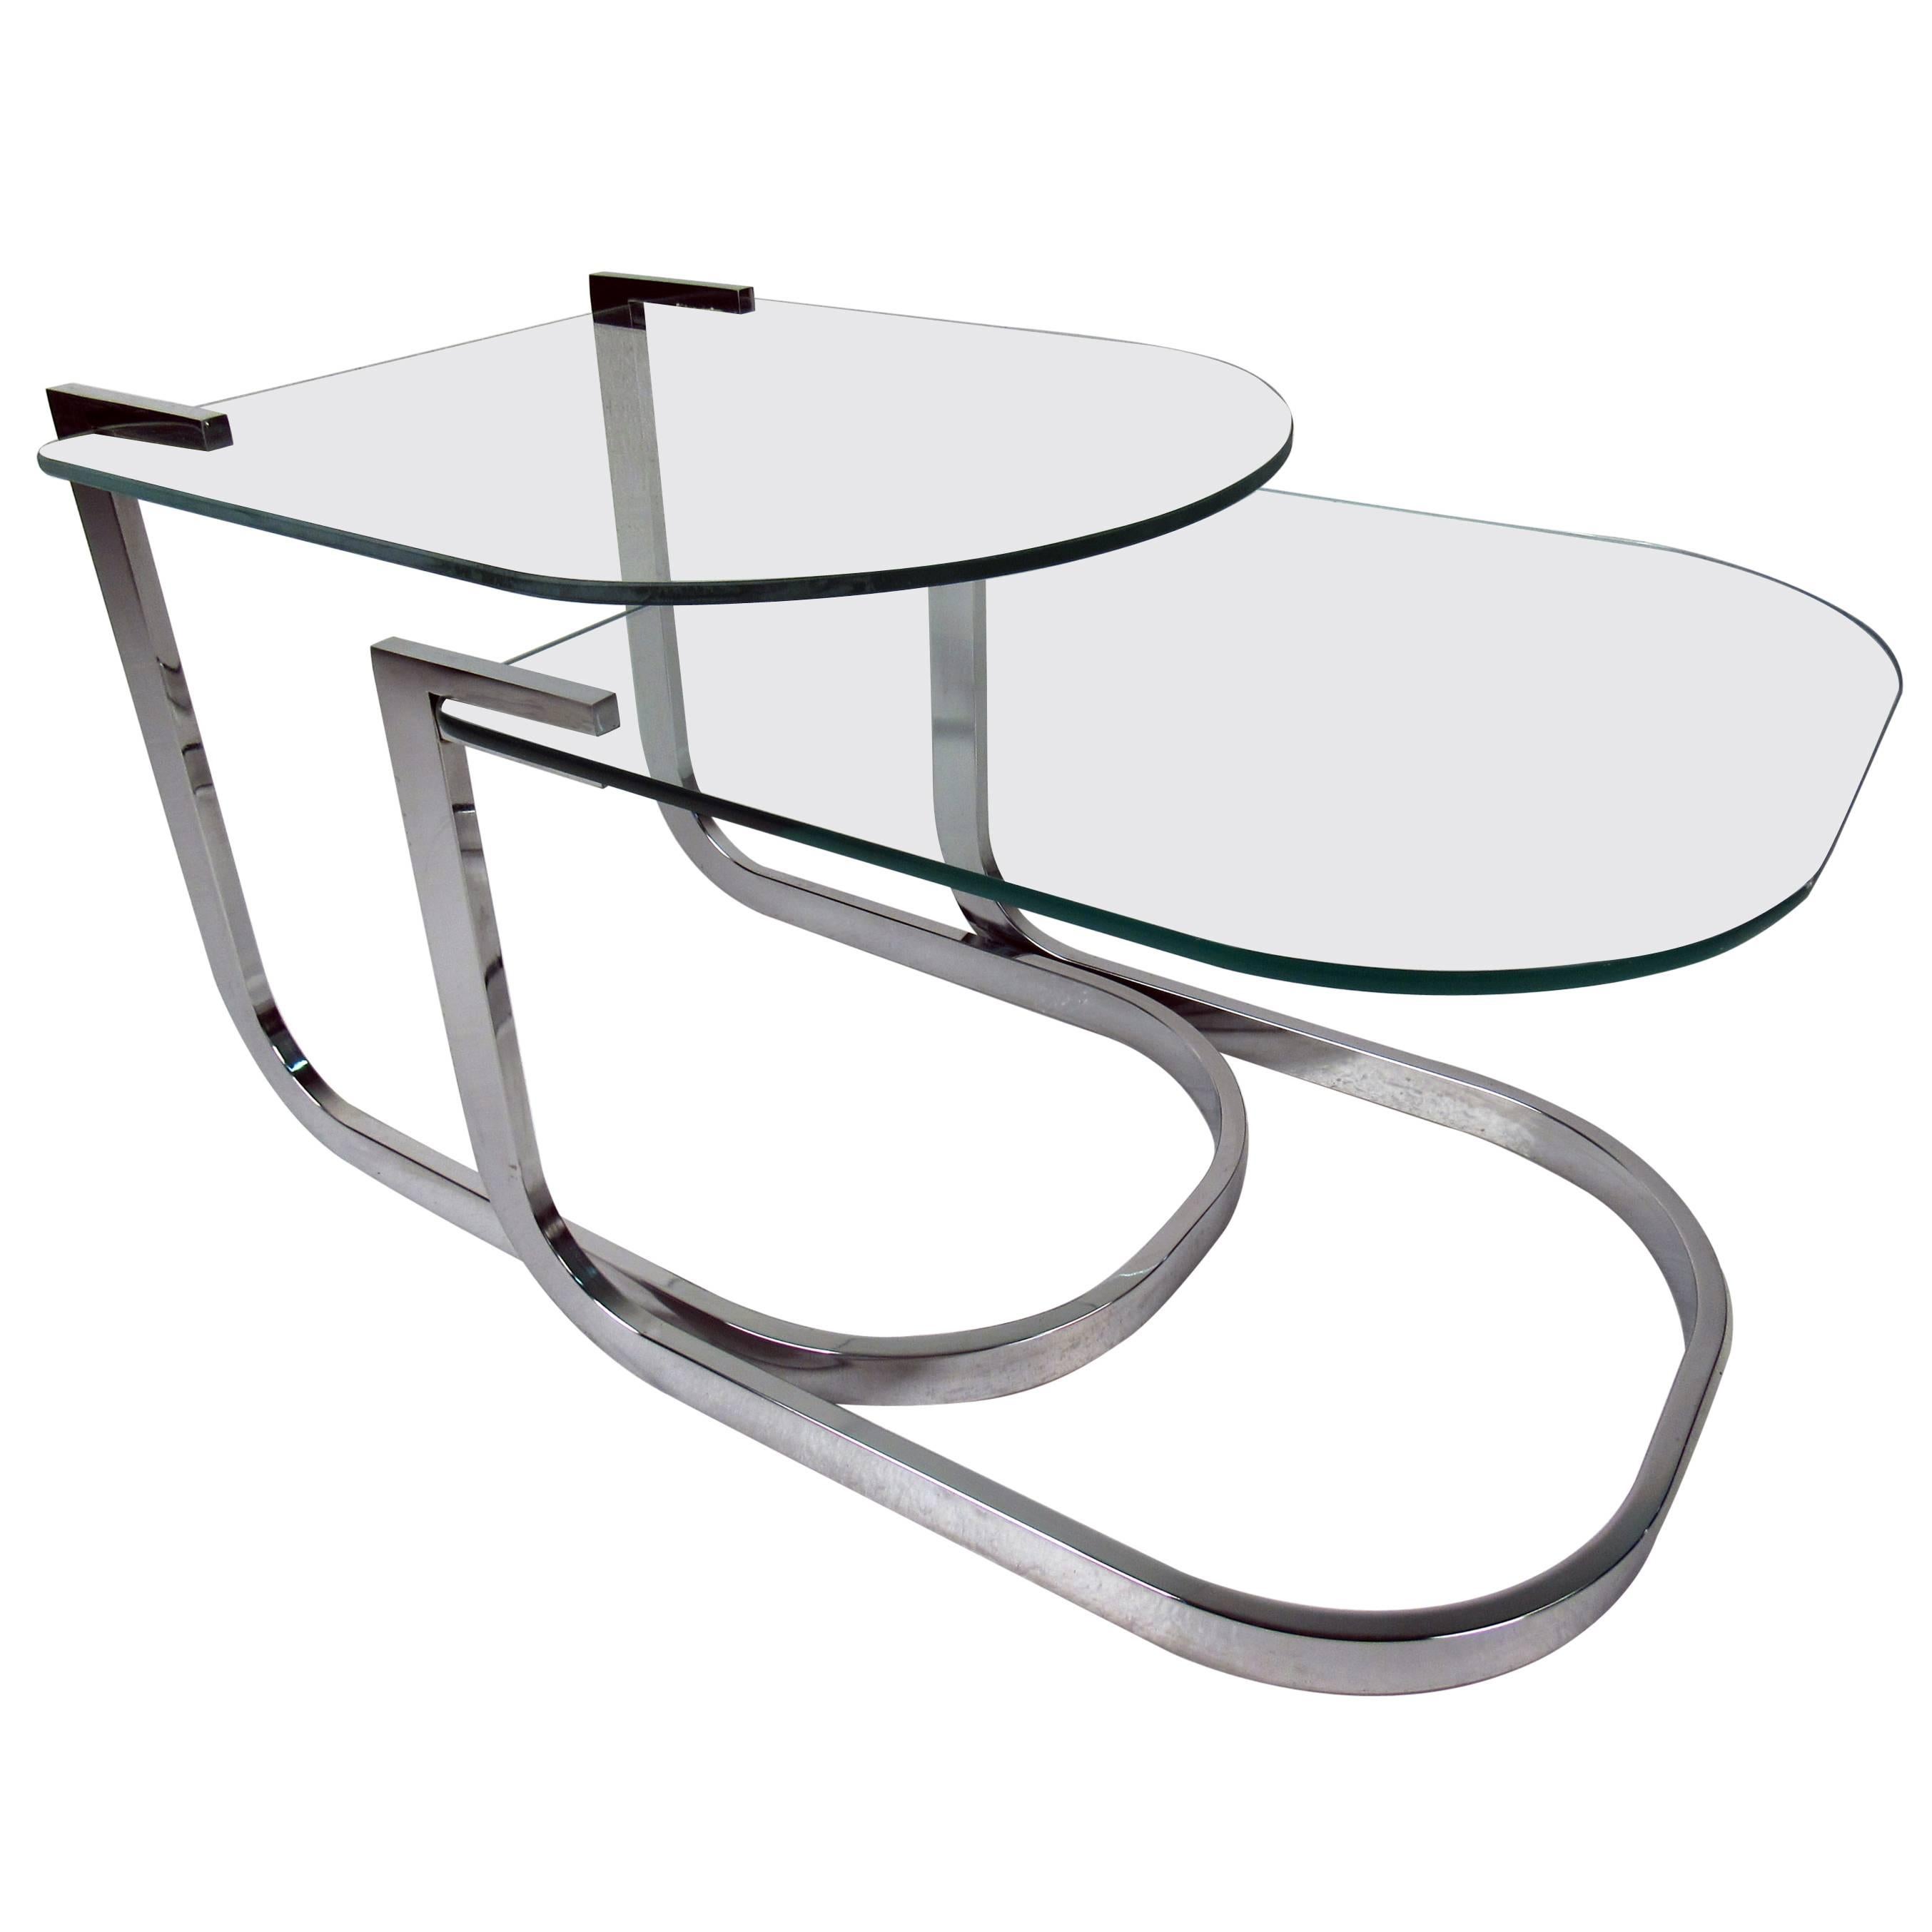 Set of Midcentury Chrome and Glass Nesting Tables by DIA For Sale